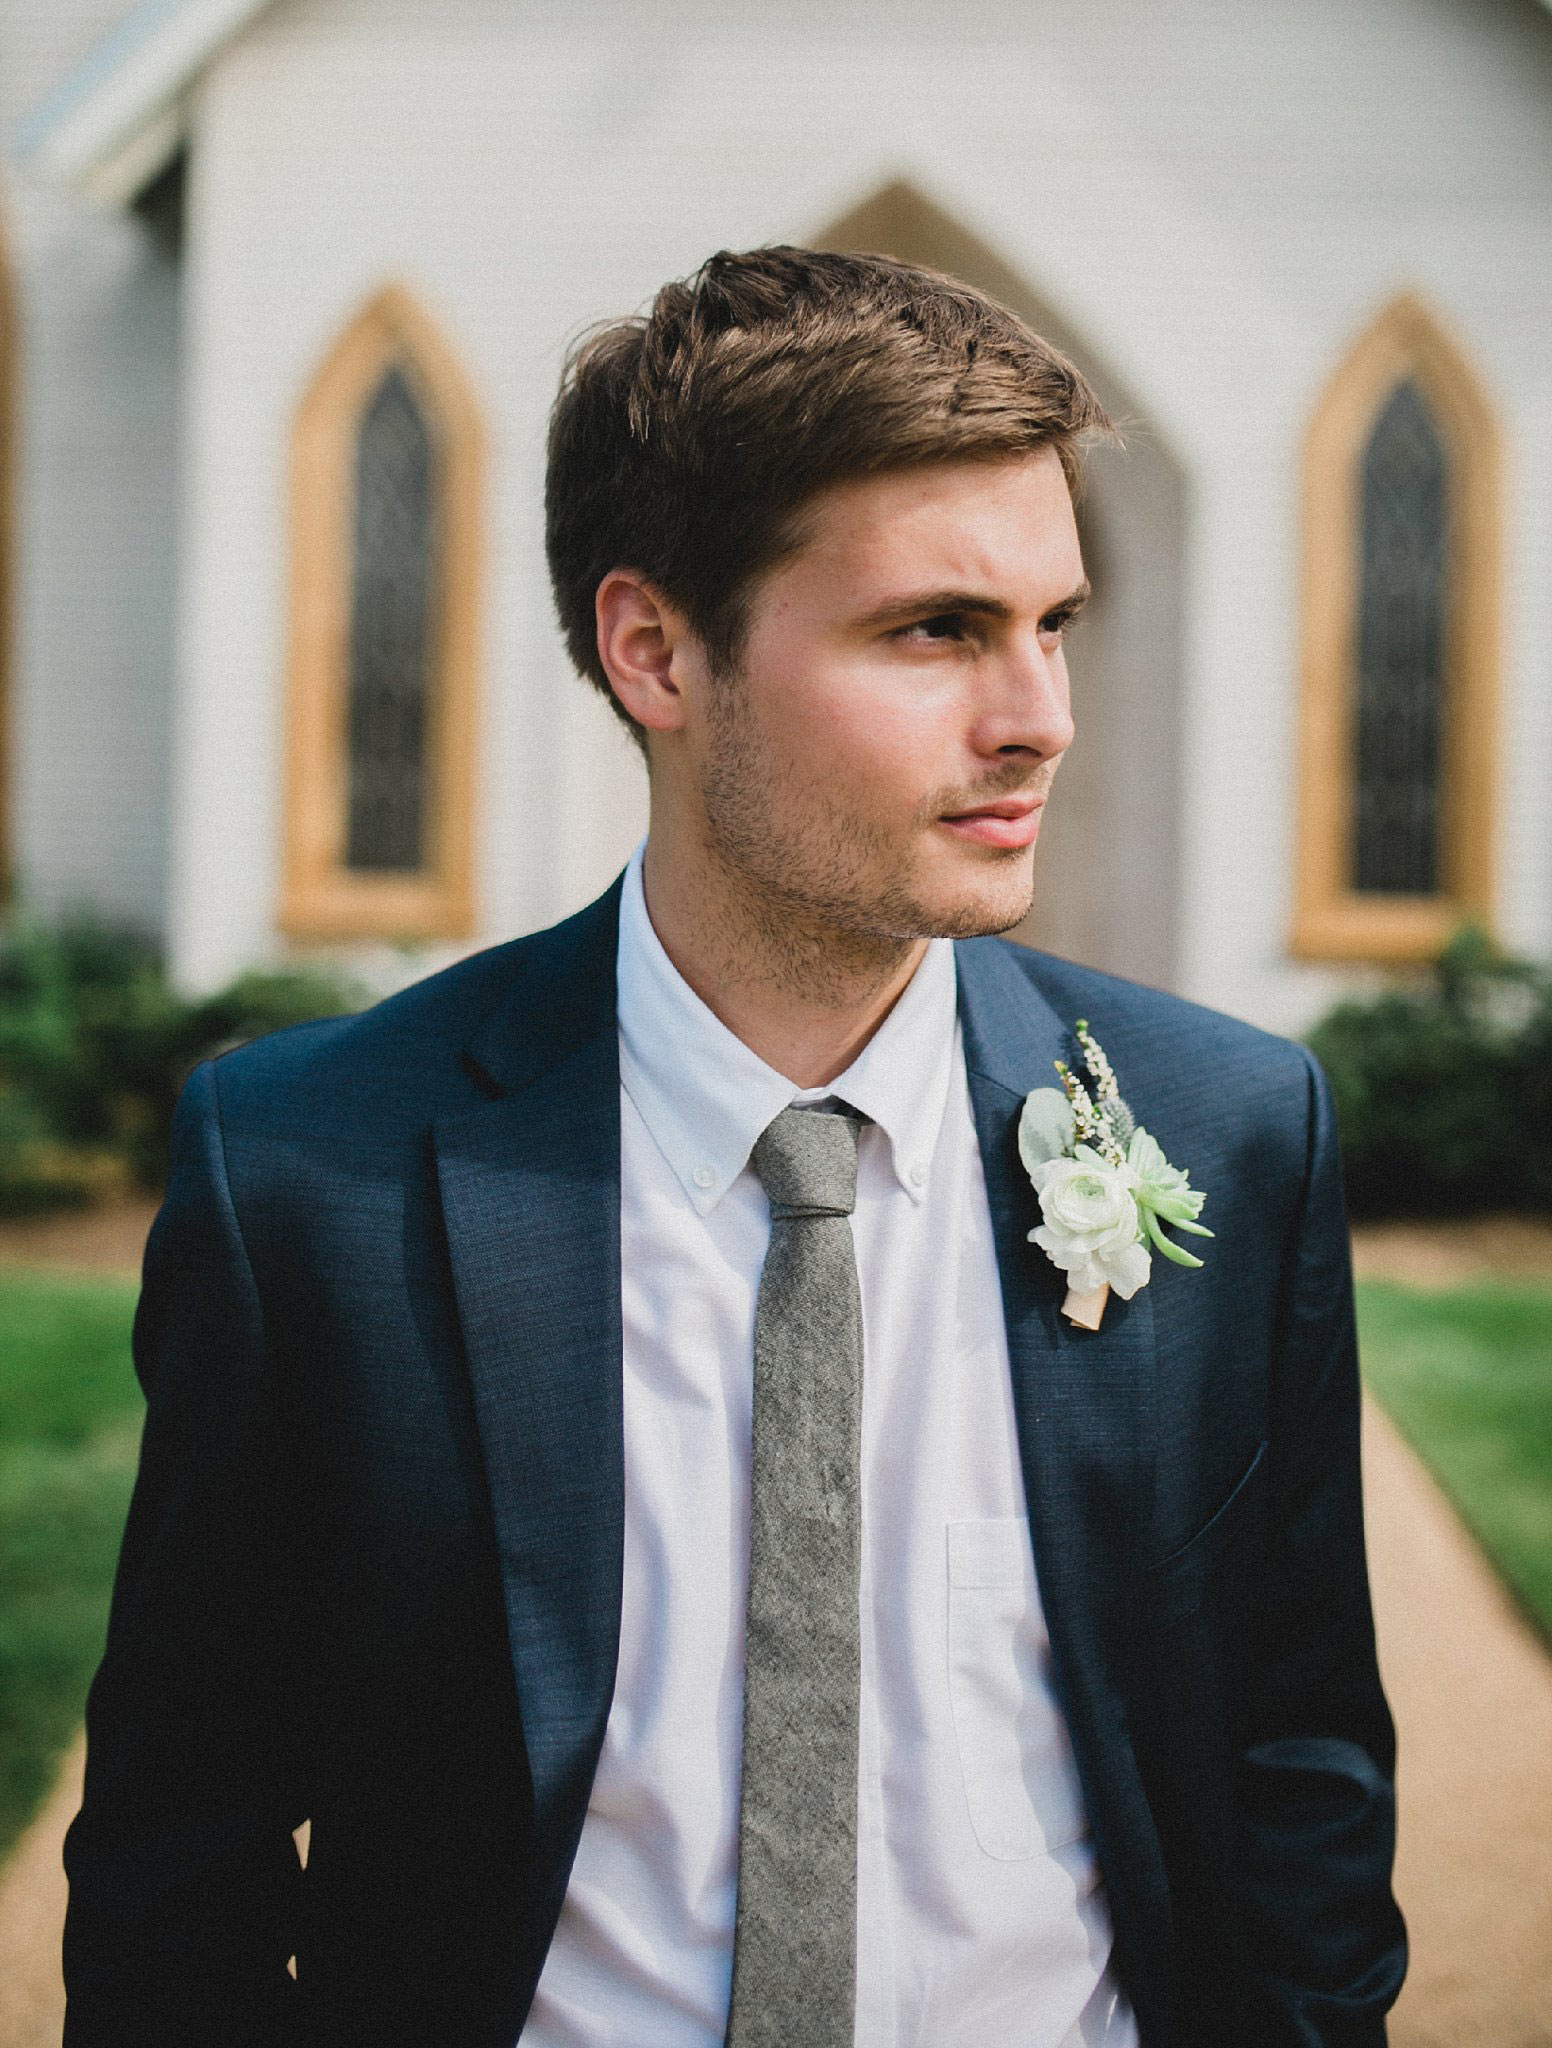 Groom in navy suite with succulent boutonniere